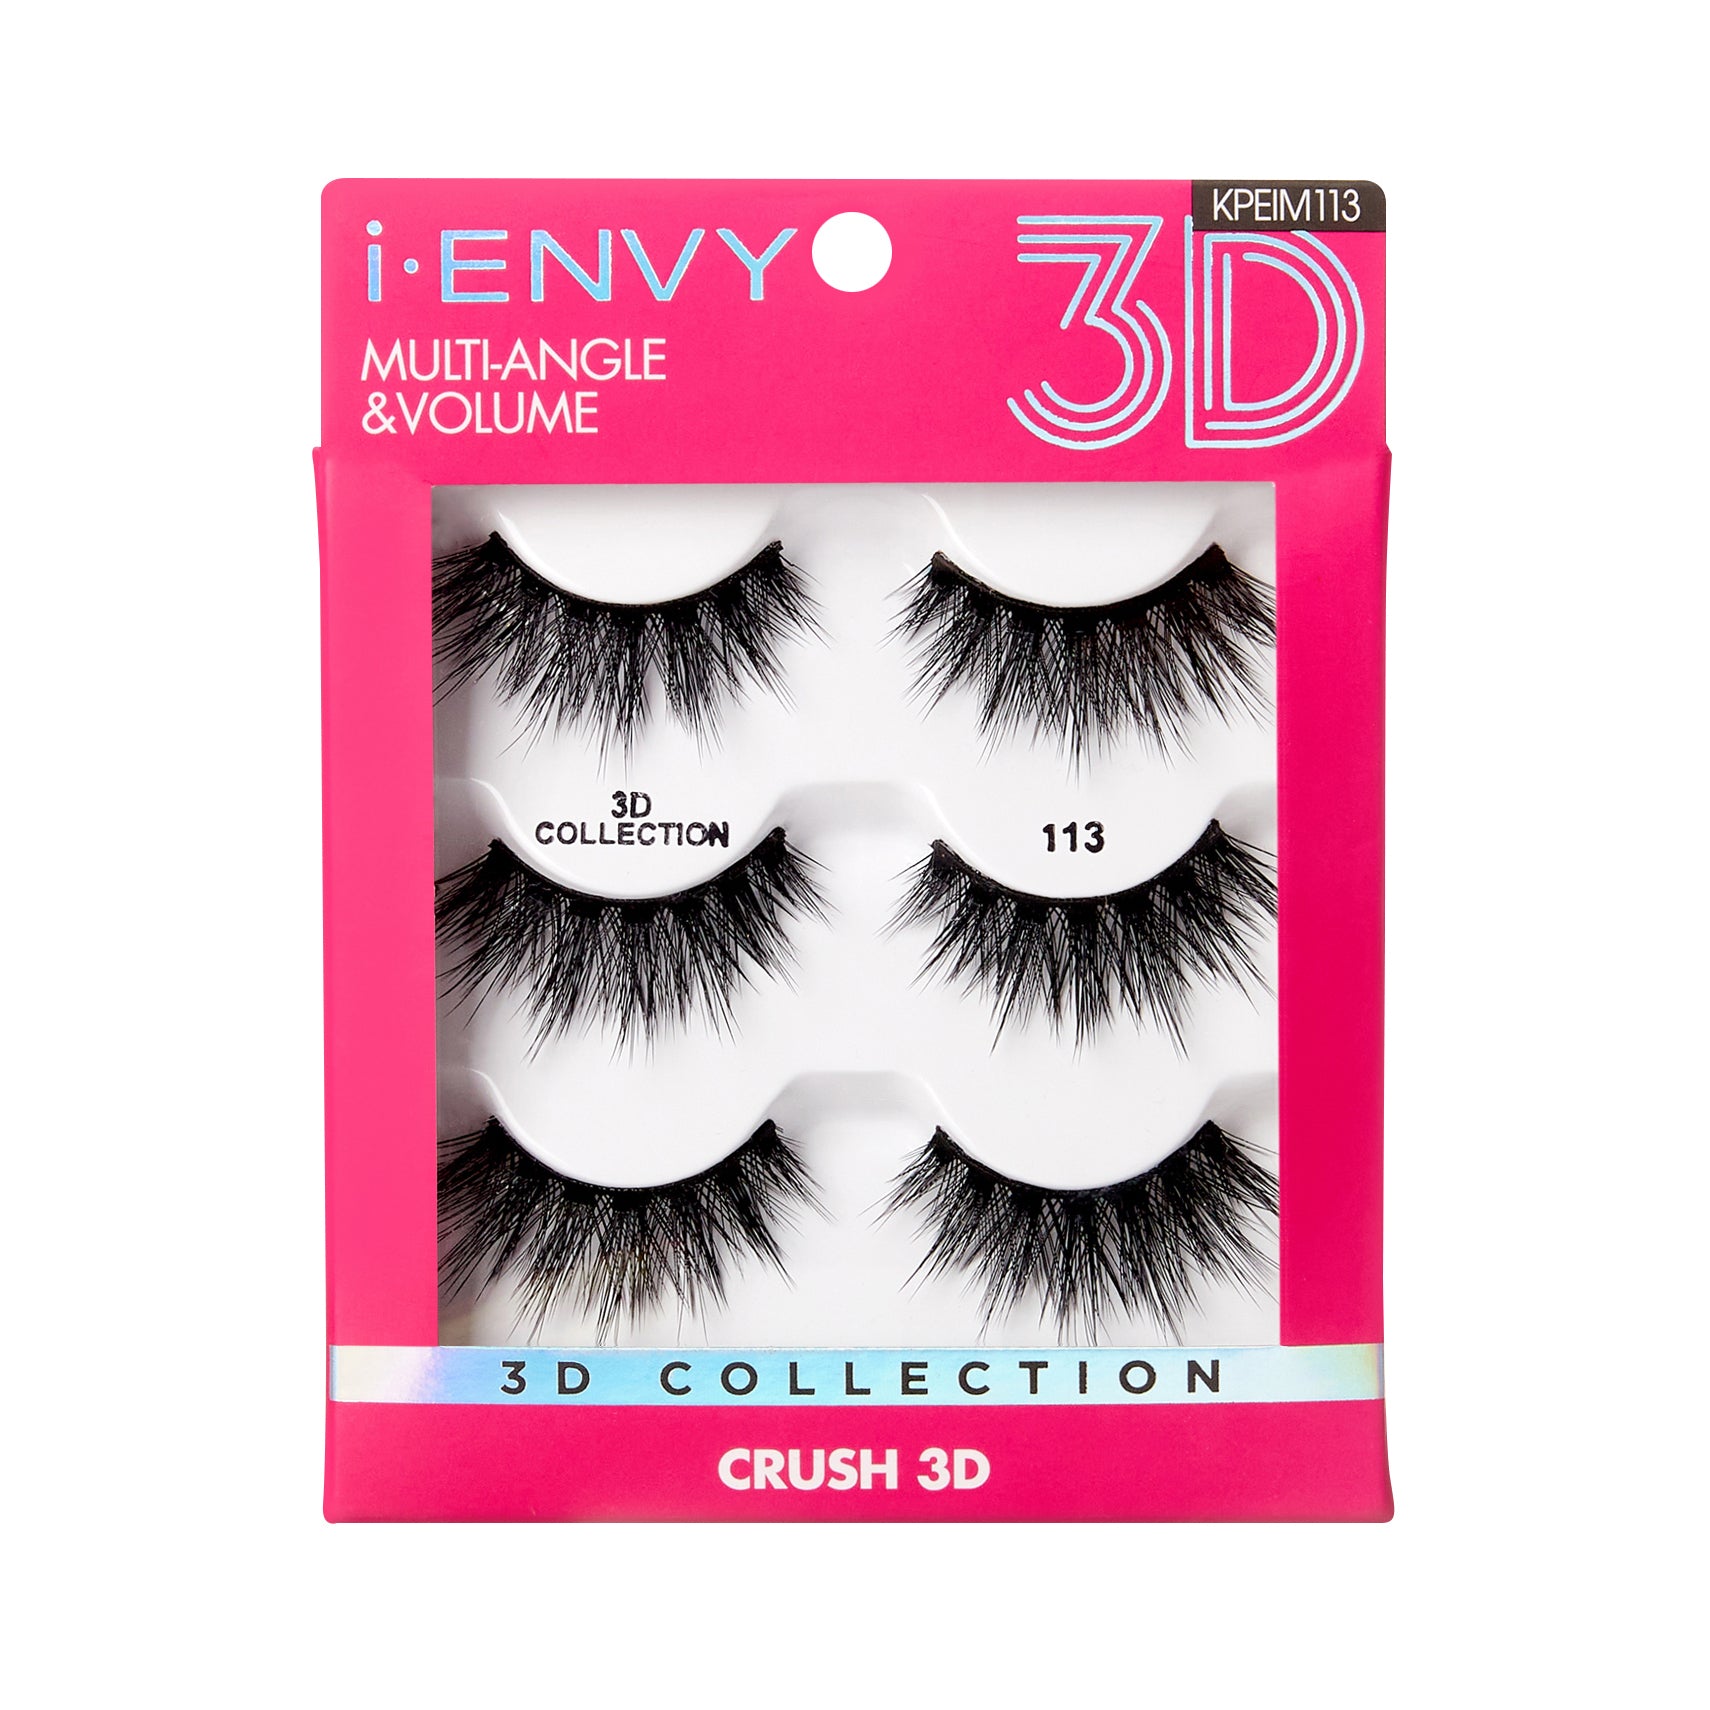 I.Envy By Kiss 3D Lashes Multi Pack Multiangle & Volume Collection-113 (KPEIM113)